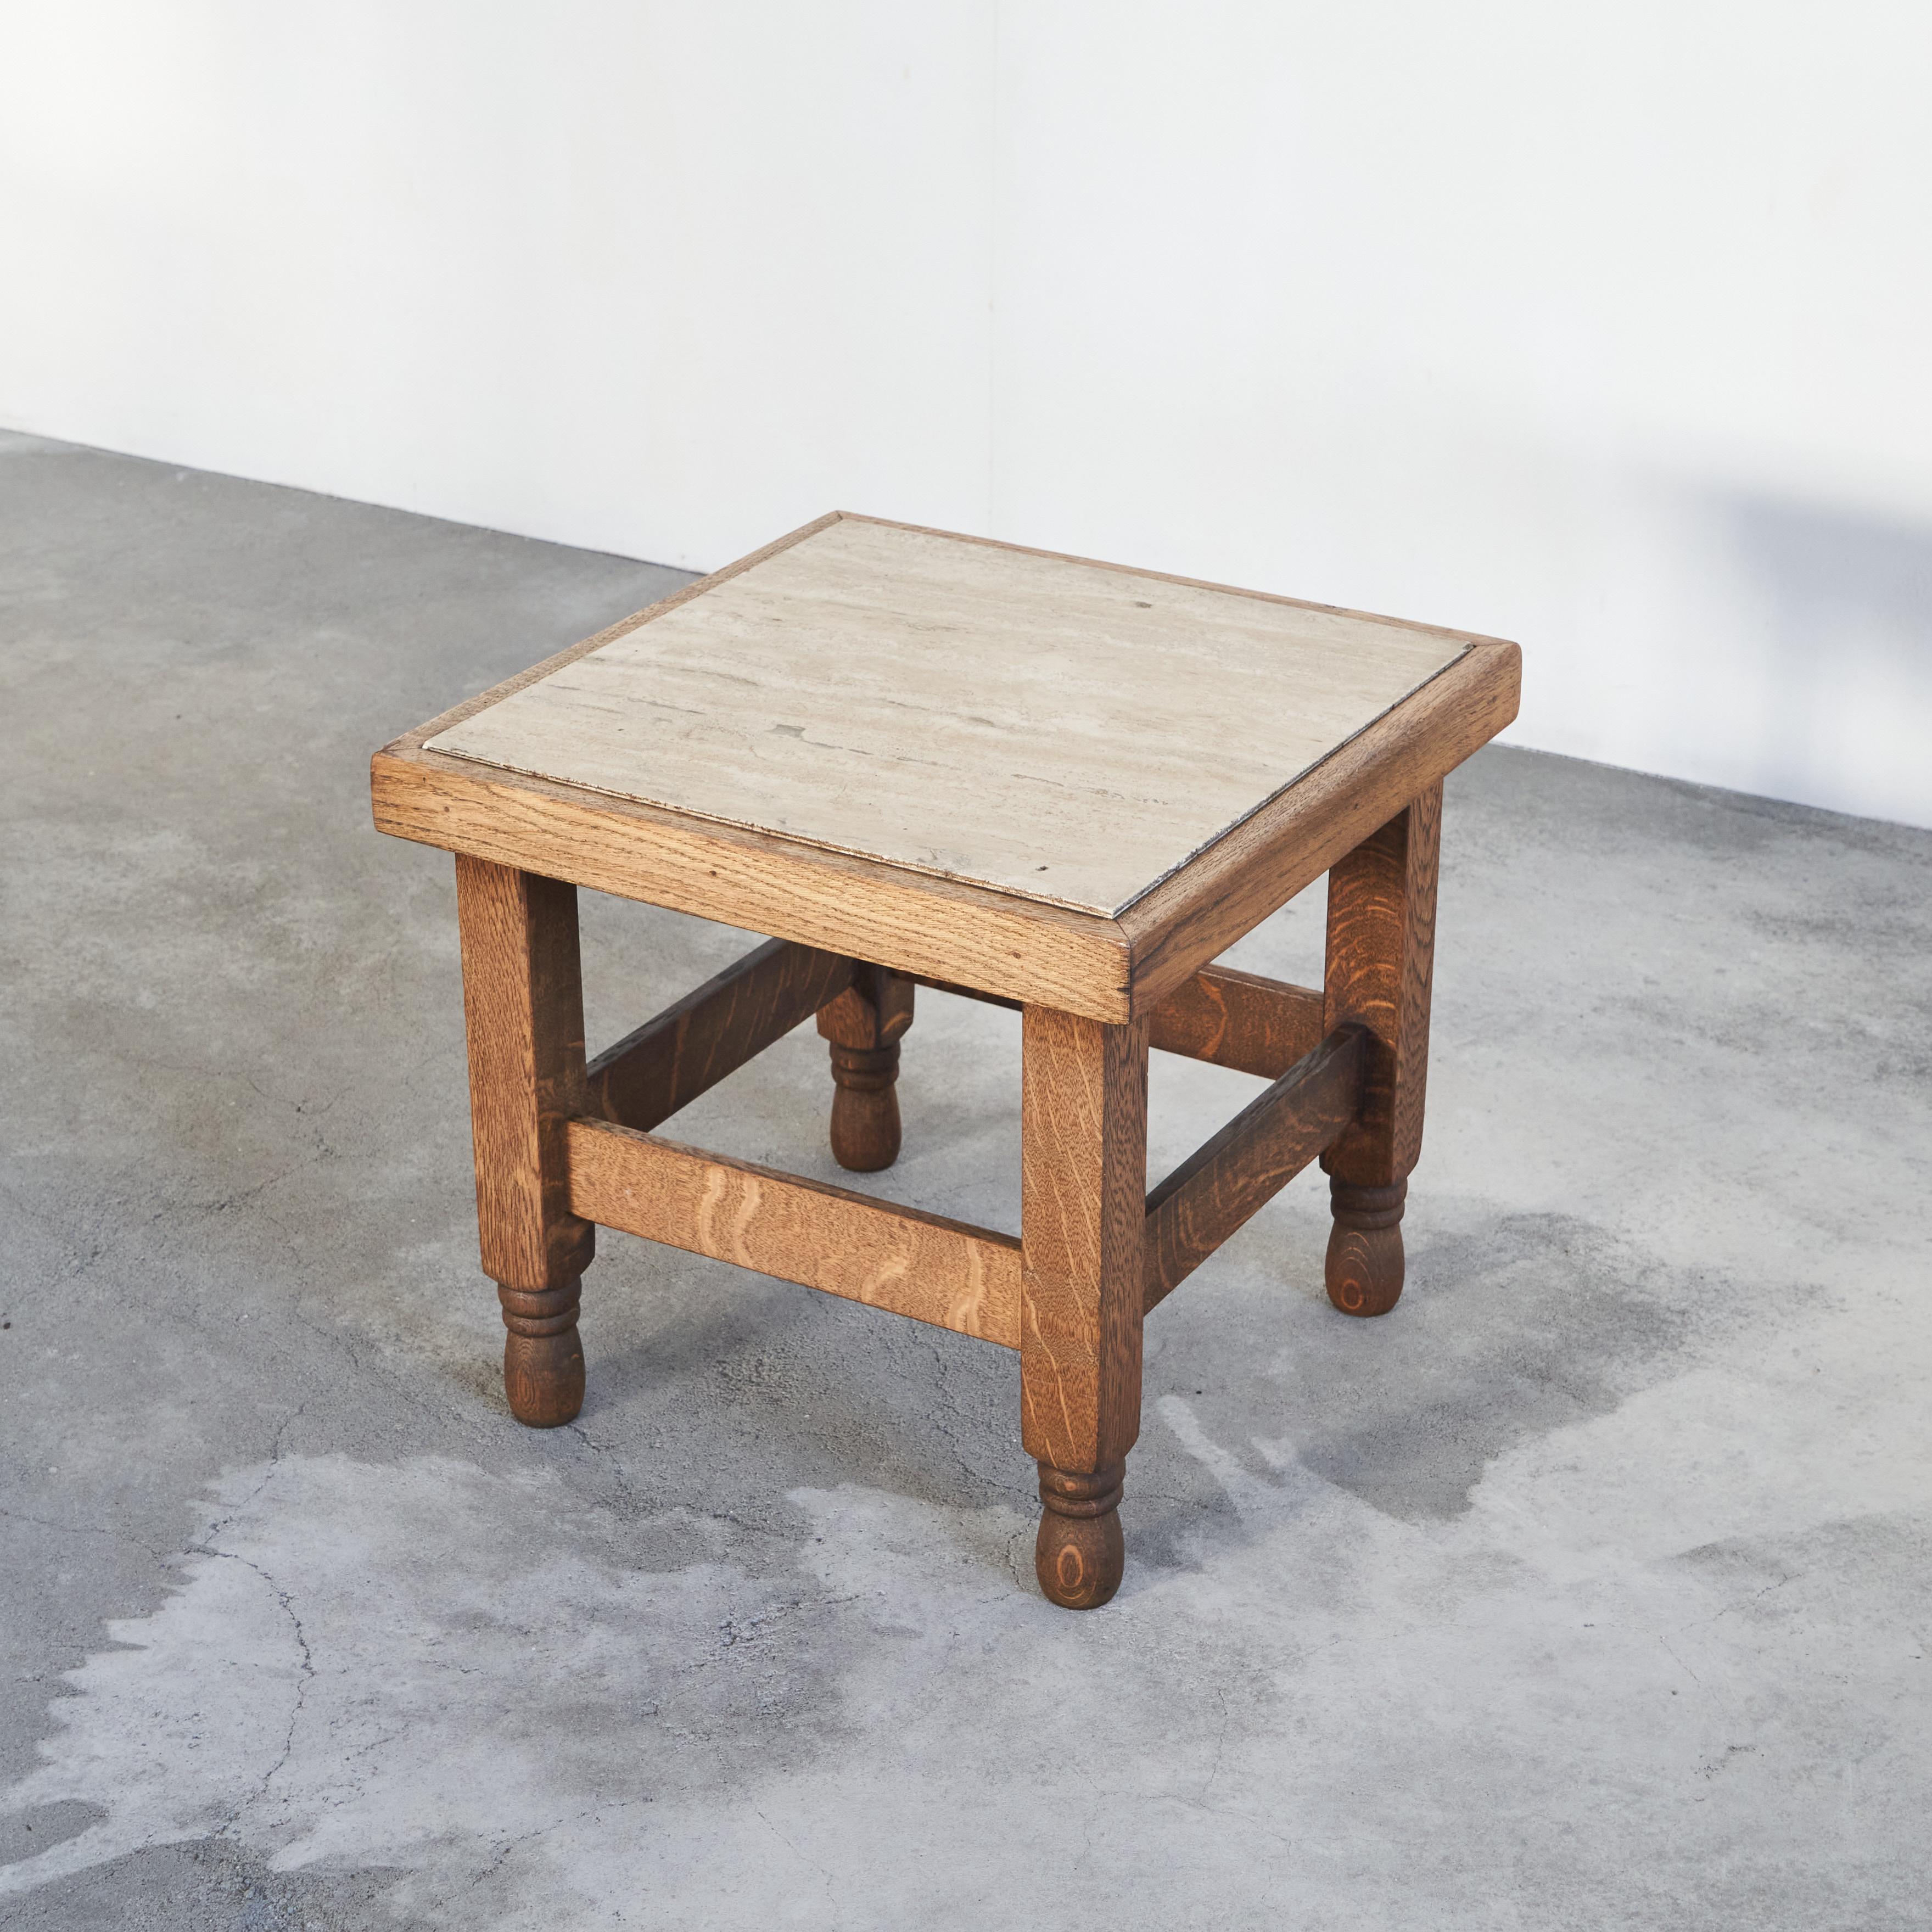 Art Deco Side Table in Solid Oak and Travertine 1930s.

This is a stunning side table in solid oak and beautiful travertine in a very subtle art deco style. Great use of materials and wonderful execution. A high end piece, which must have been